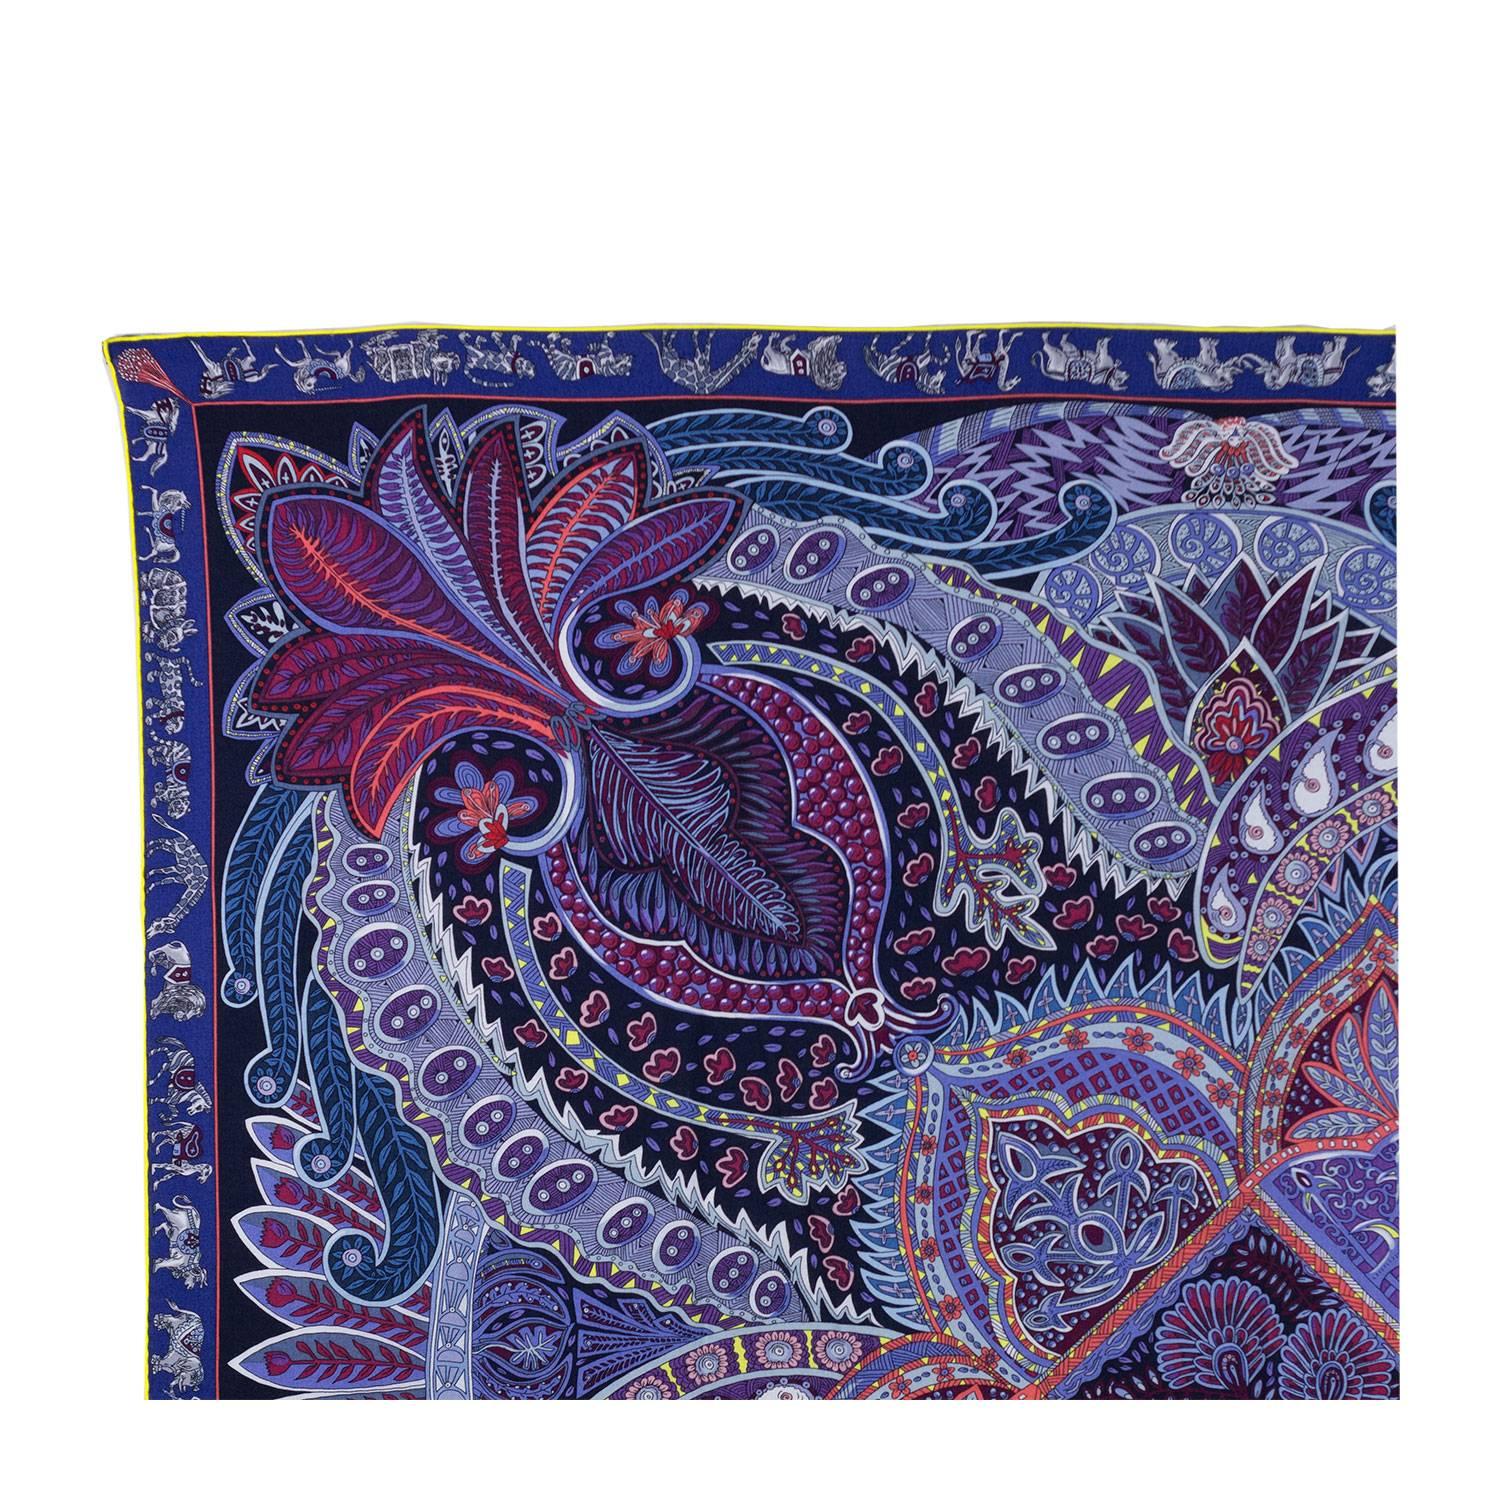 Hermes Shawl "Chale" "Le Jardin de la Maharani" Title Marine / Parme / Mauve Color 2017

Pristine condition. Pre-owned and never used.

Bought it in Hermes store in 2017.

Model: Shawl (Chale).

Title: Le Jardin de la